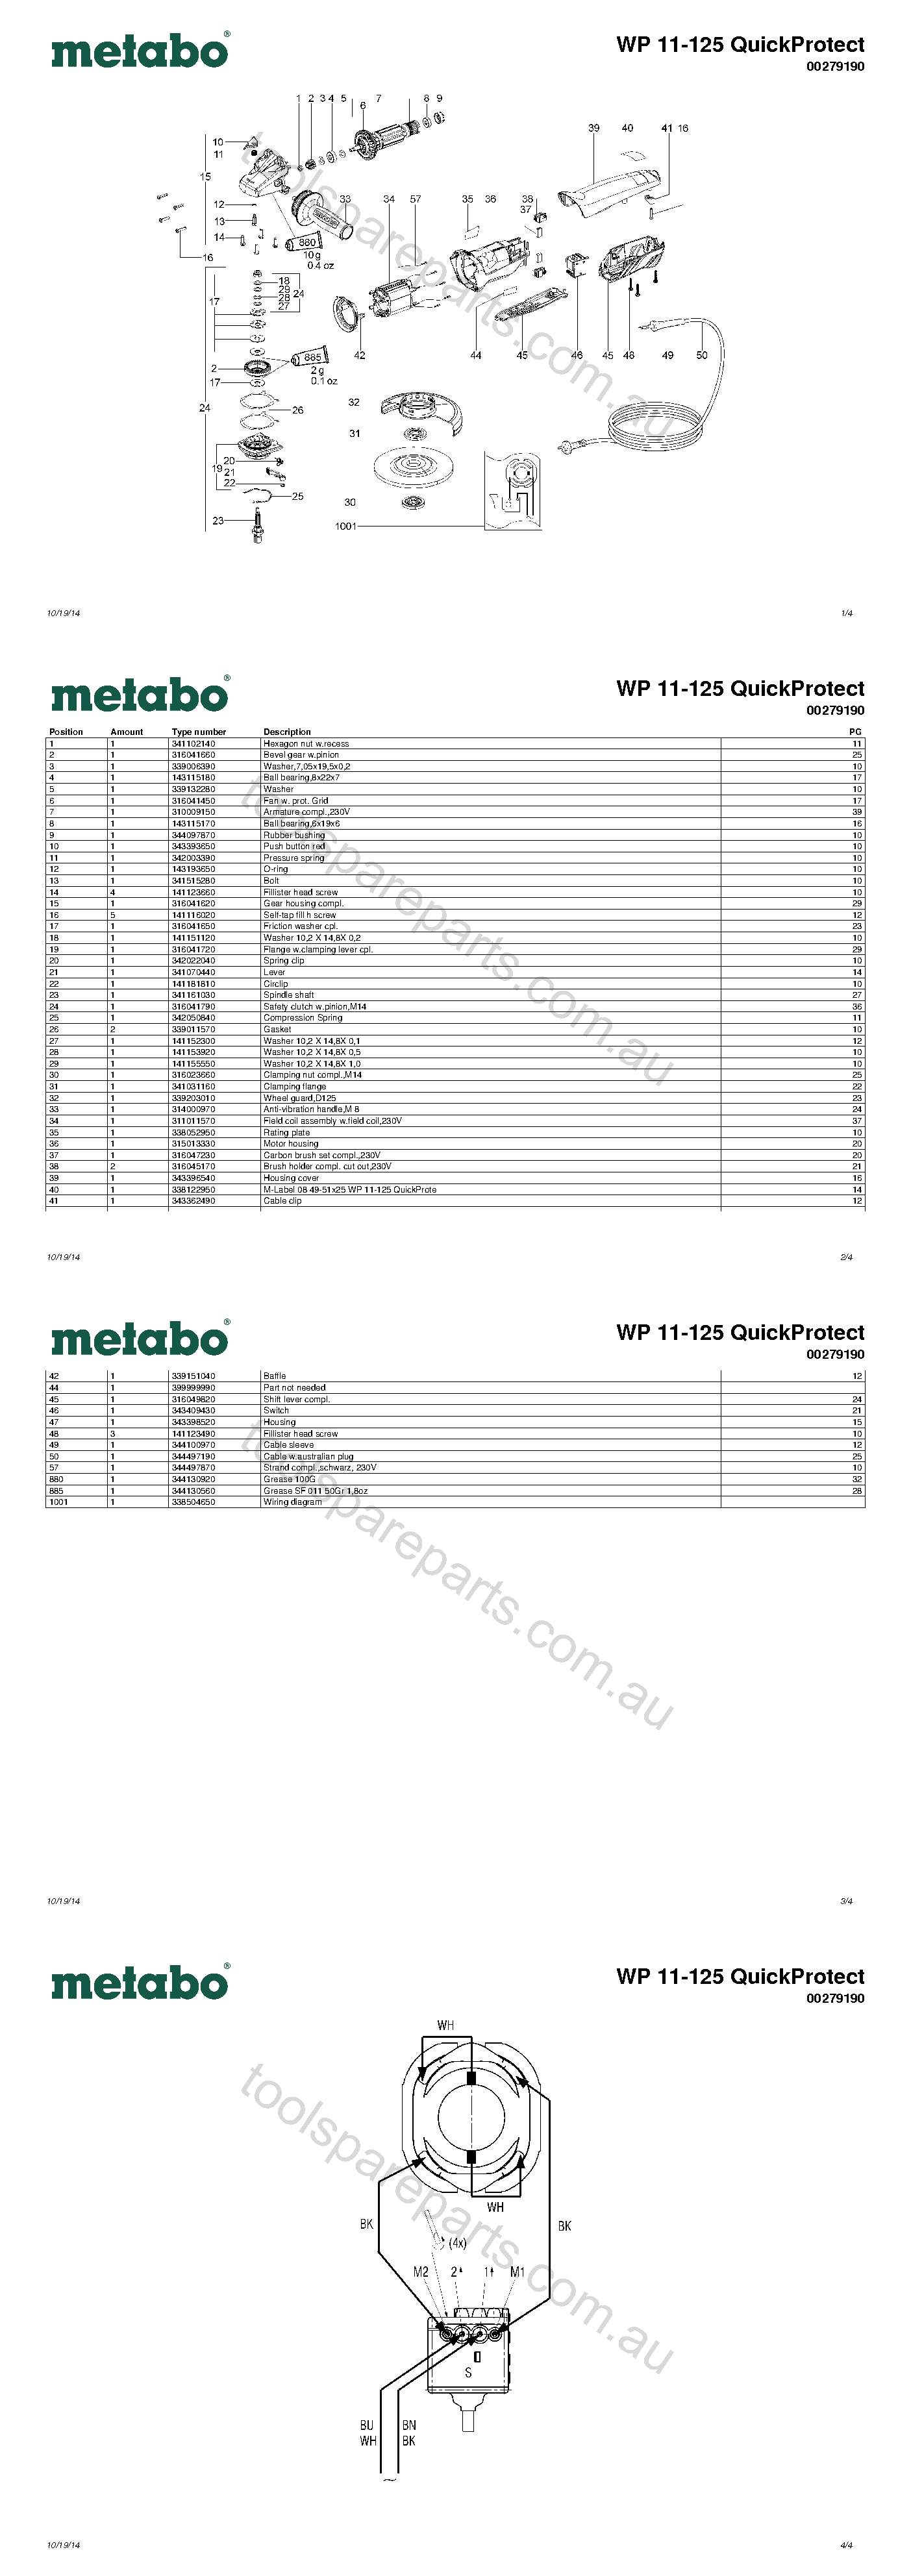 Metabo WP 11-125 QuickProtect 00279190  Diagram 1